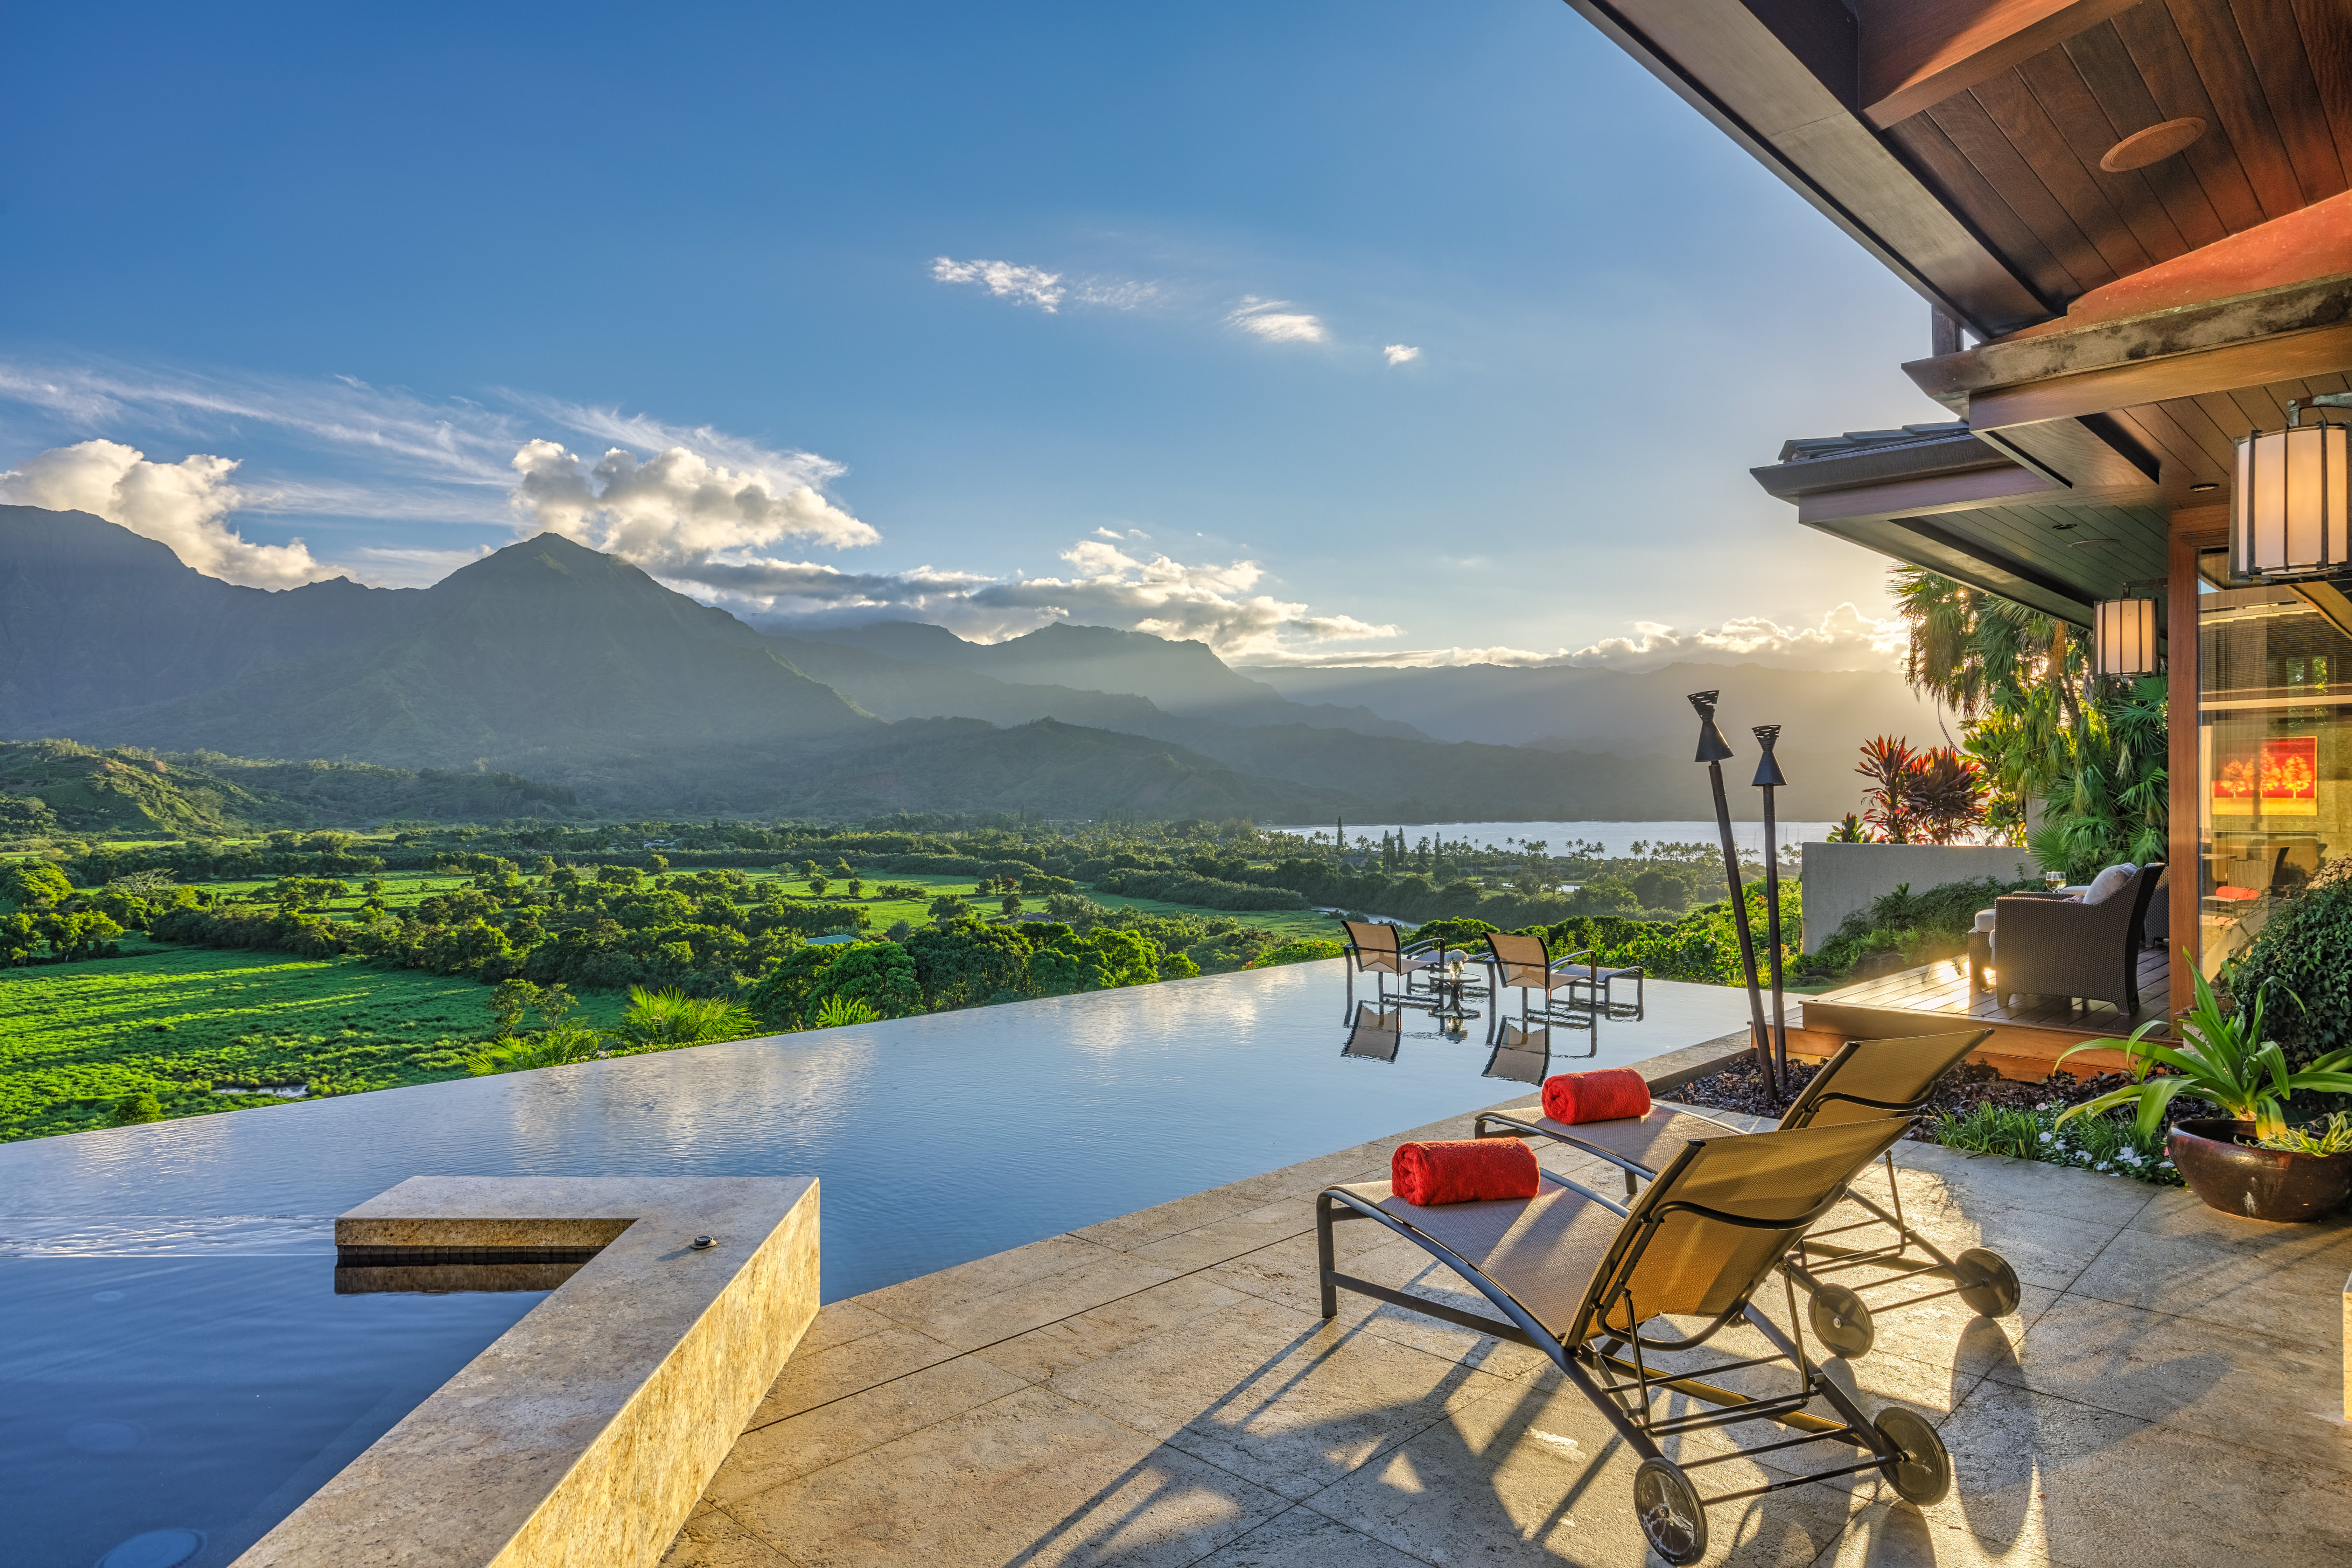 Hawaii’s ultra-luxury real estate market smashes records, as sales soar 600%. He..